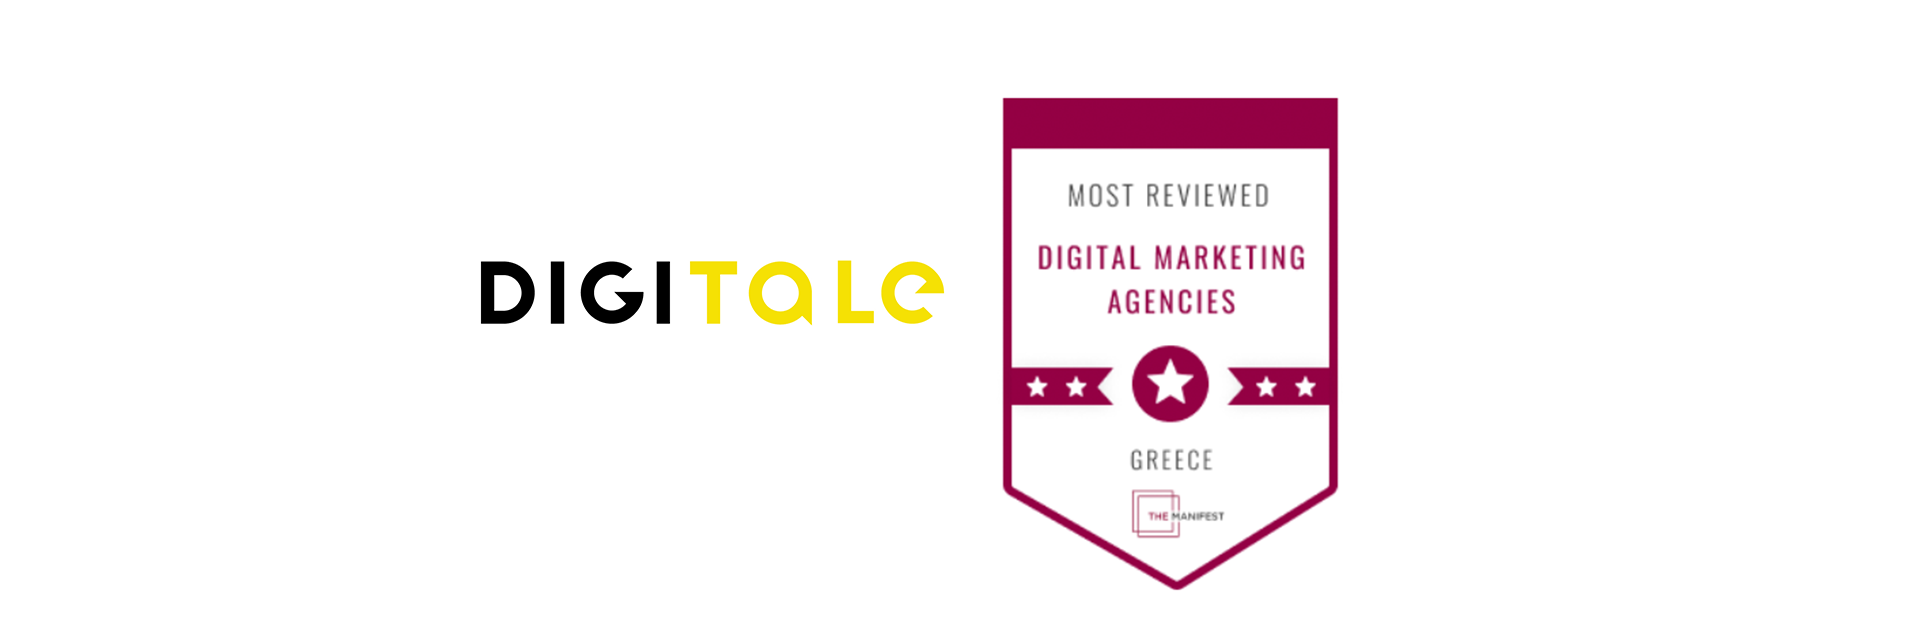 Article - Digitale | One of the Most Reviewed Digital Marketing Agencies in Greece